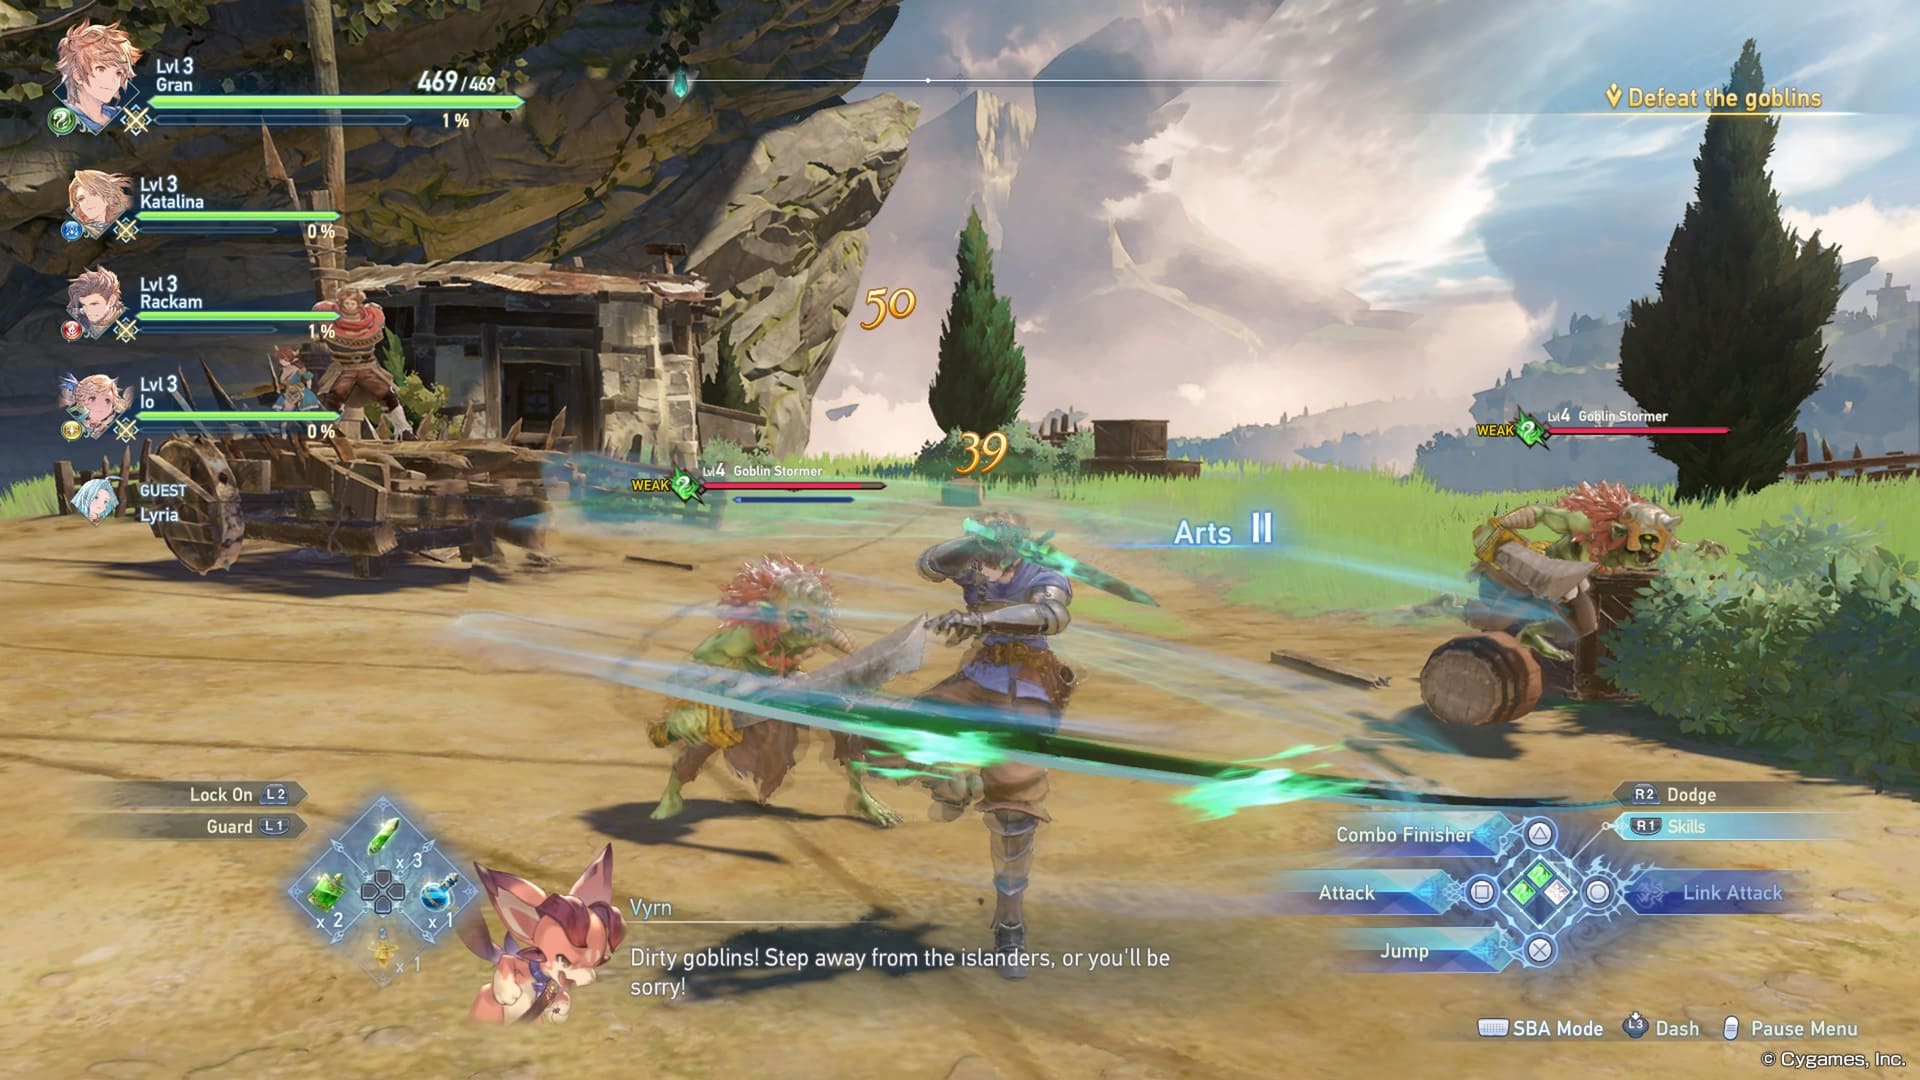 No JRPG fan should miss out on Granblue Fantasy: Relink, it's a ton of fun